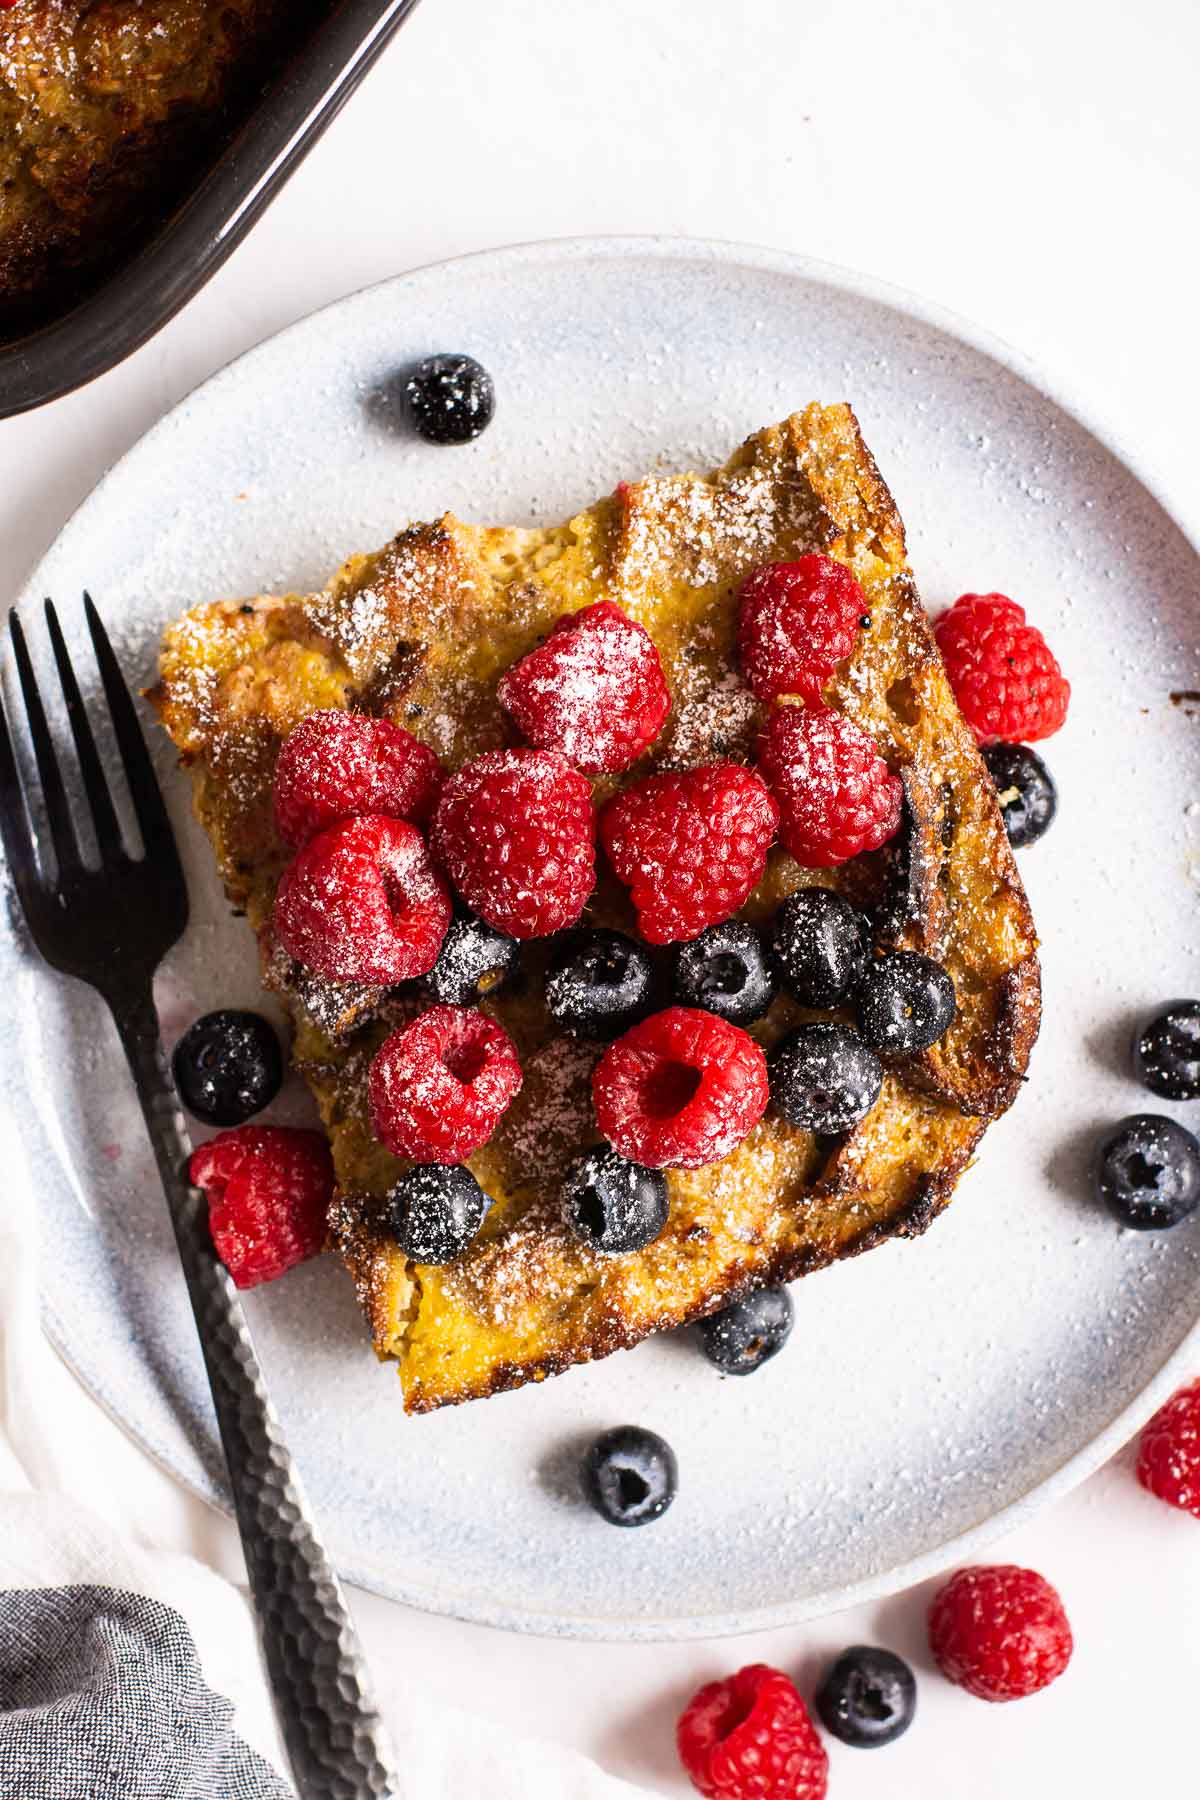 A slice of healthy french toast casserole on a plate.